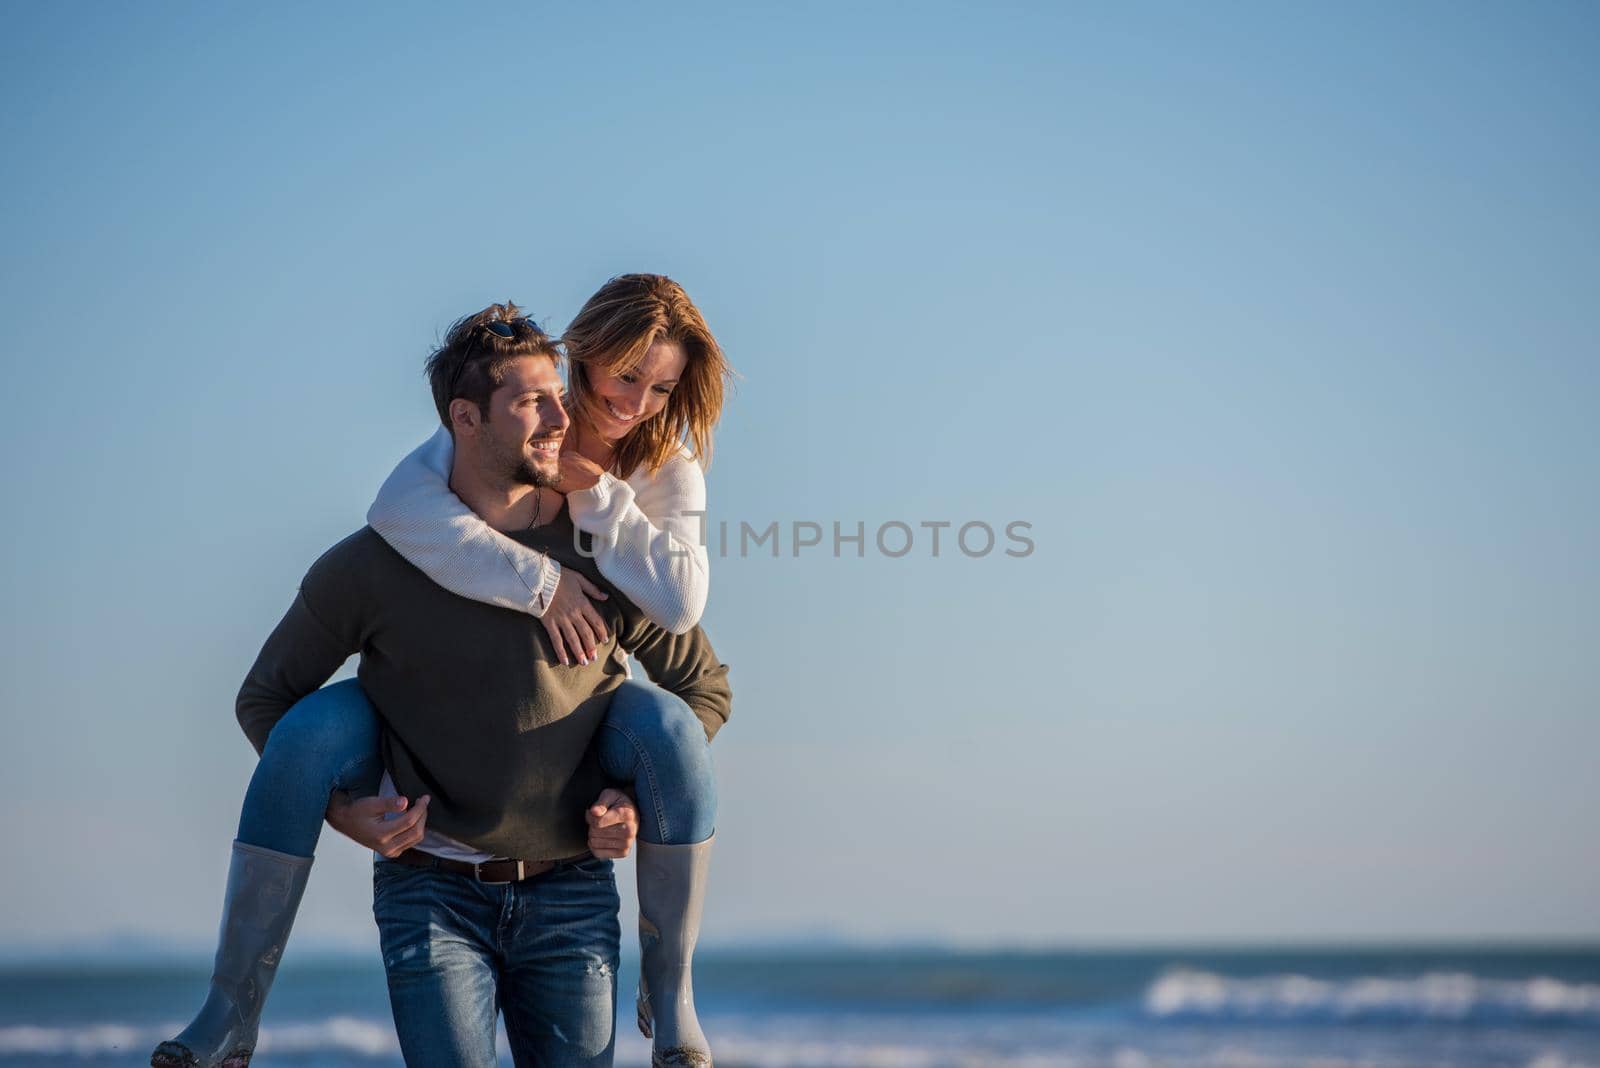 Men Giving Piggy Back Rides to his girlfriend At Sunset By The Sea, autumn time